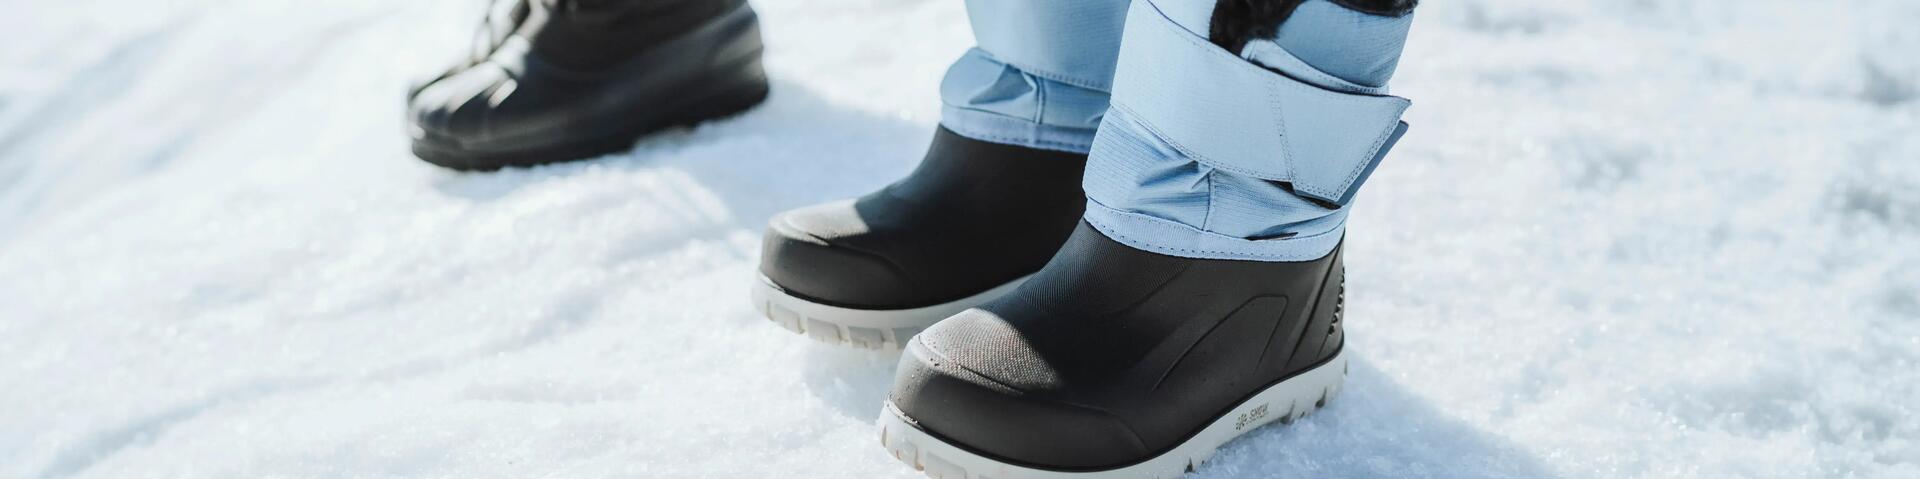 HOW TO CHOOSE YOUR SNOW BOOTS 